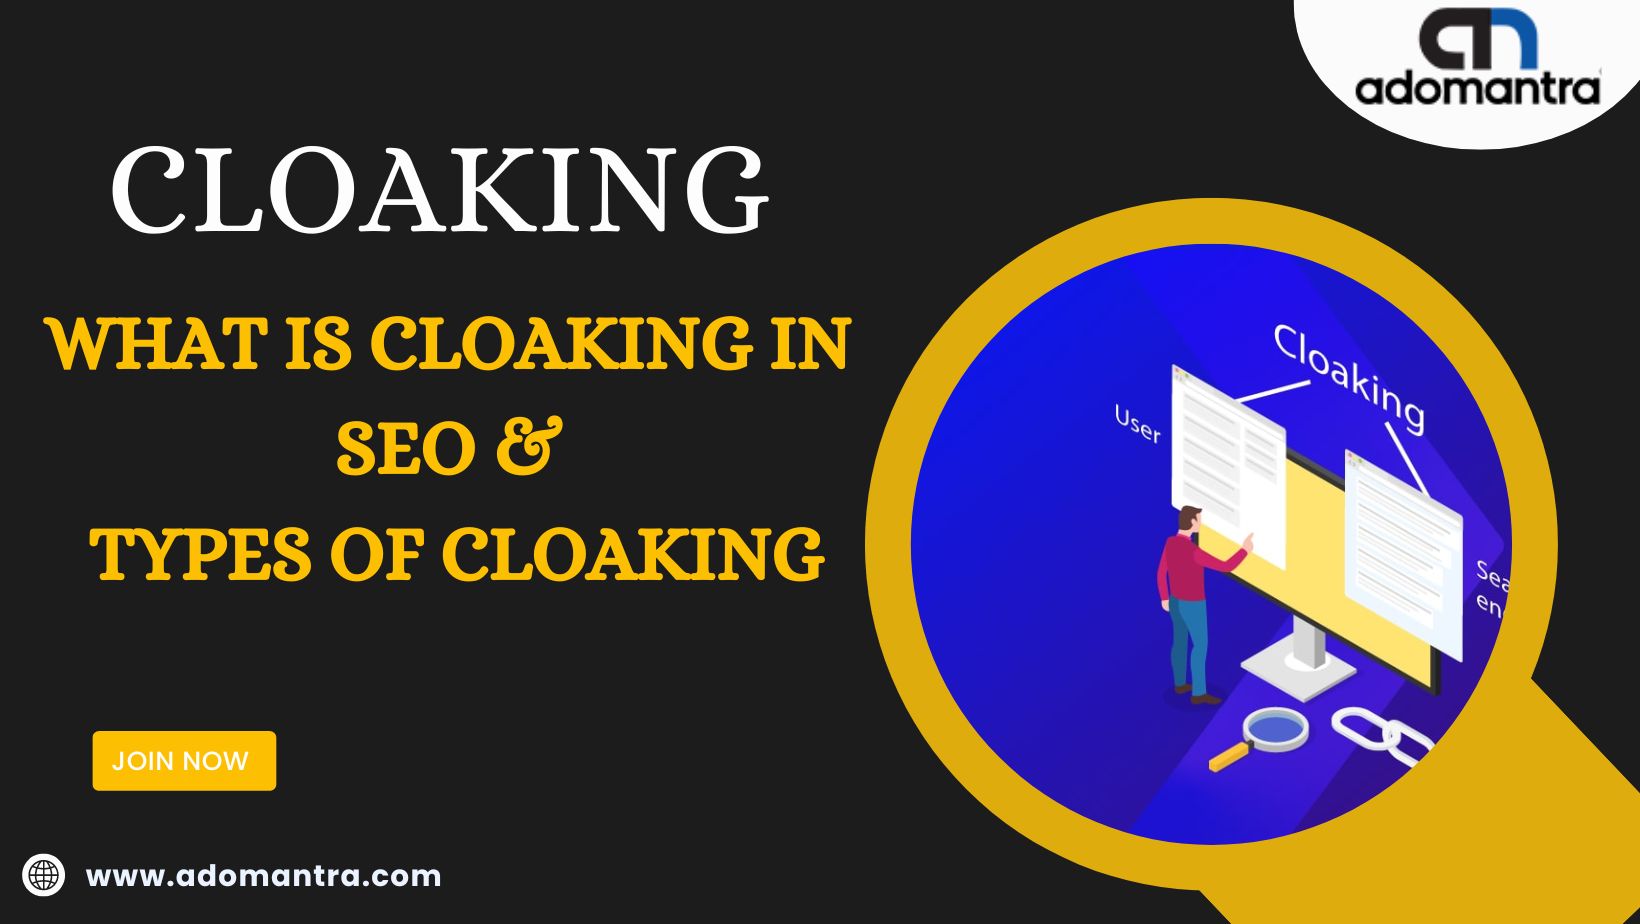 Cloaking: What Is Cloaking in SEO? & Types of Cloaking